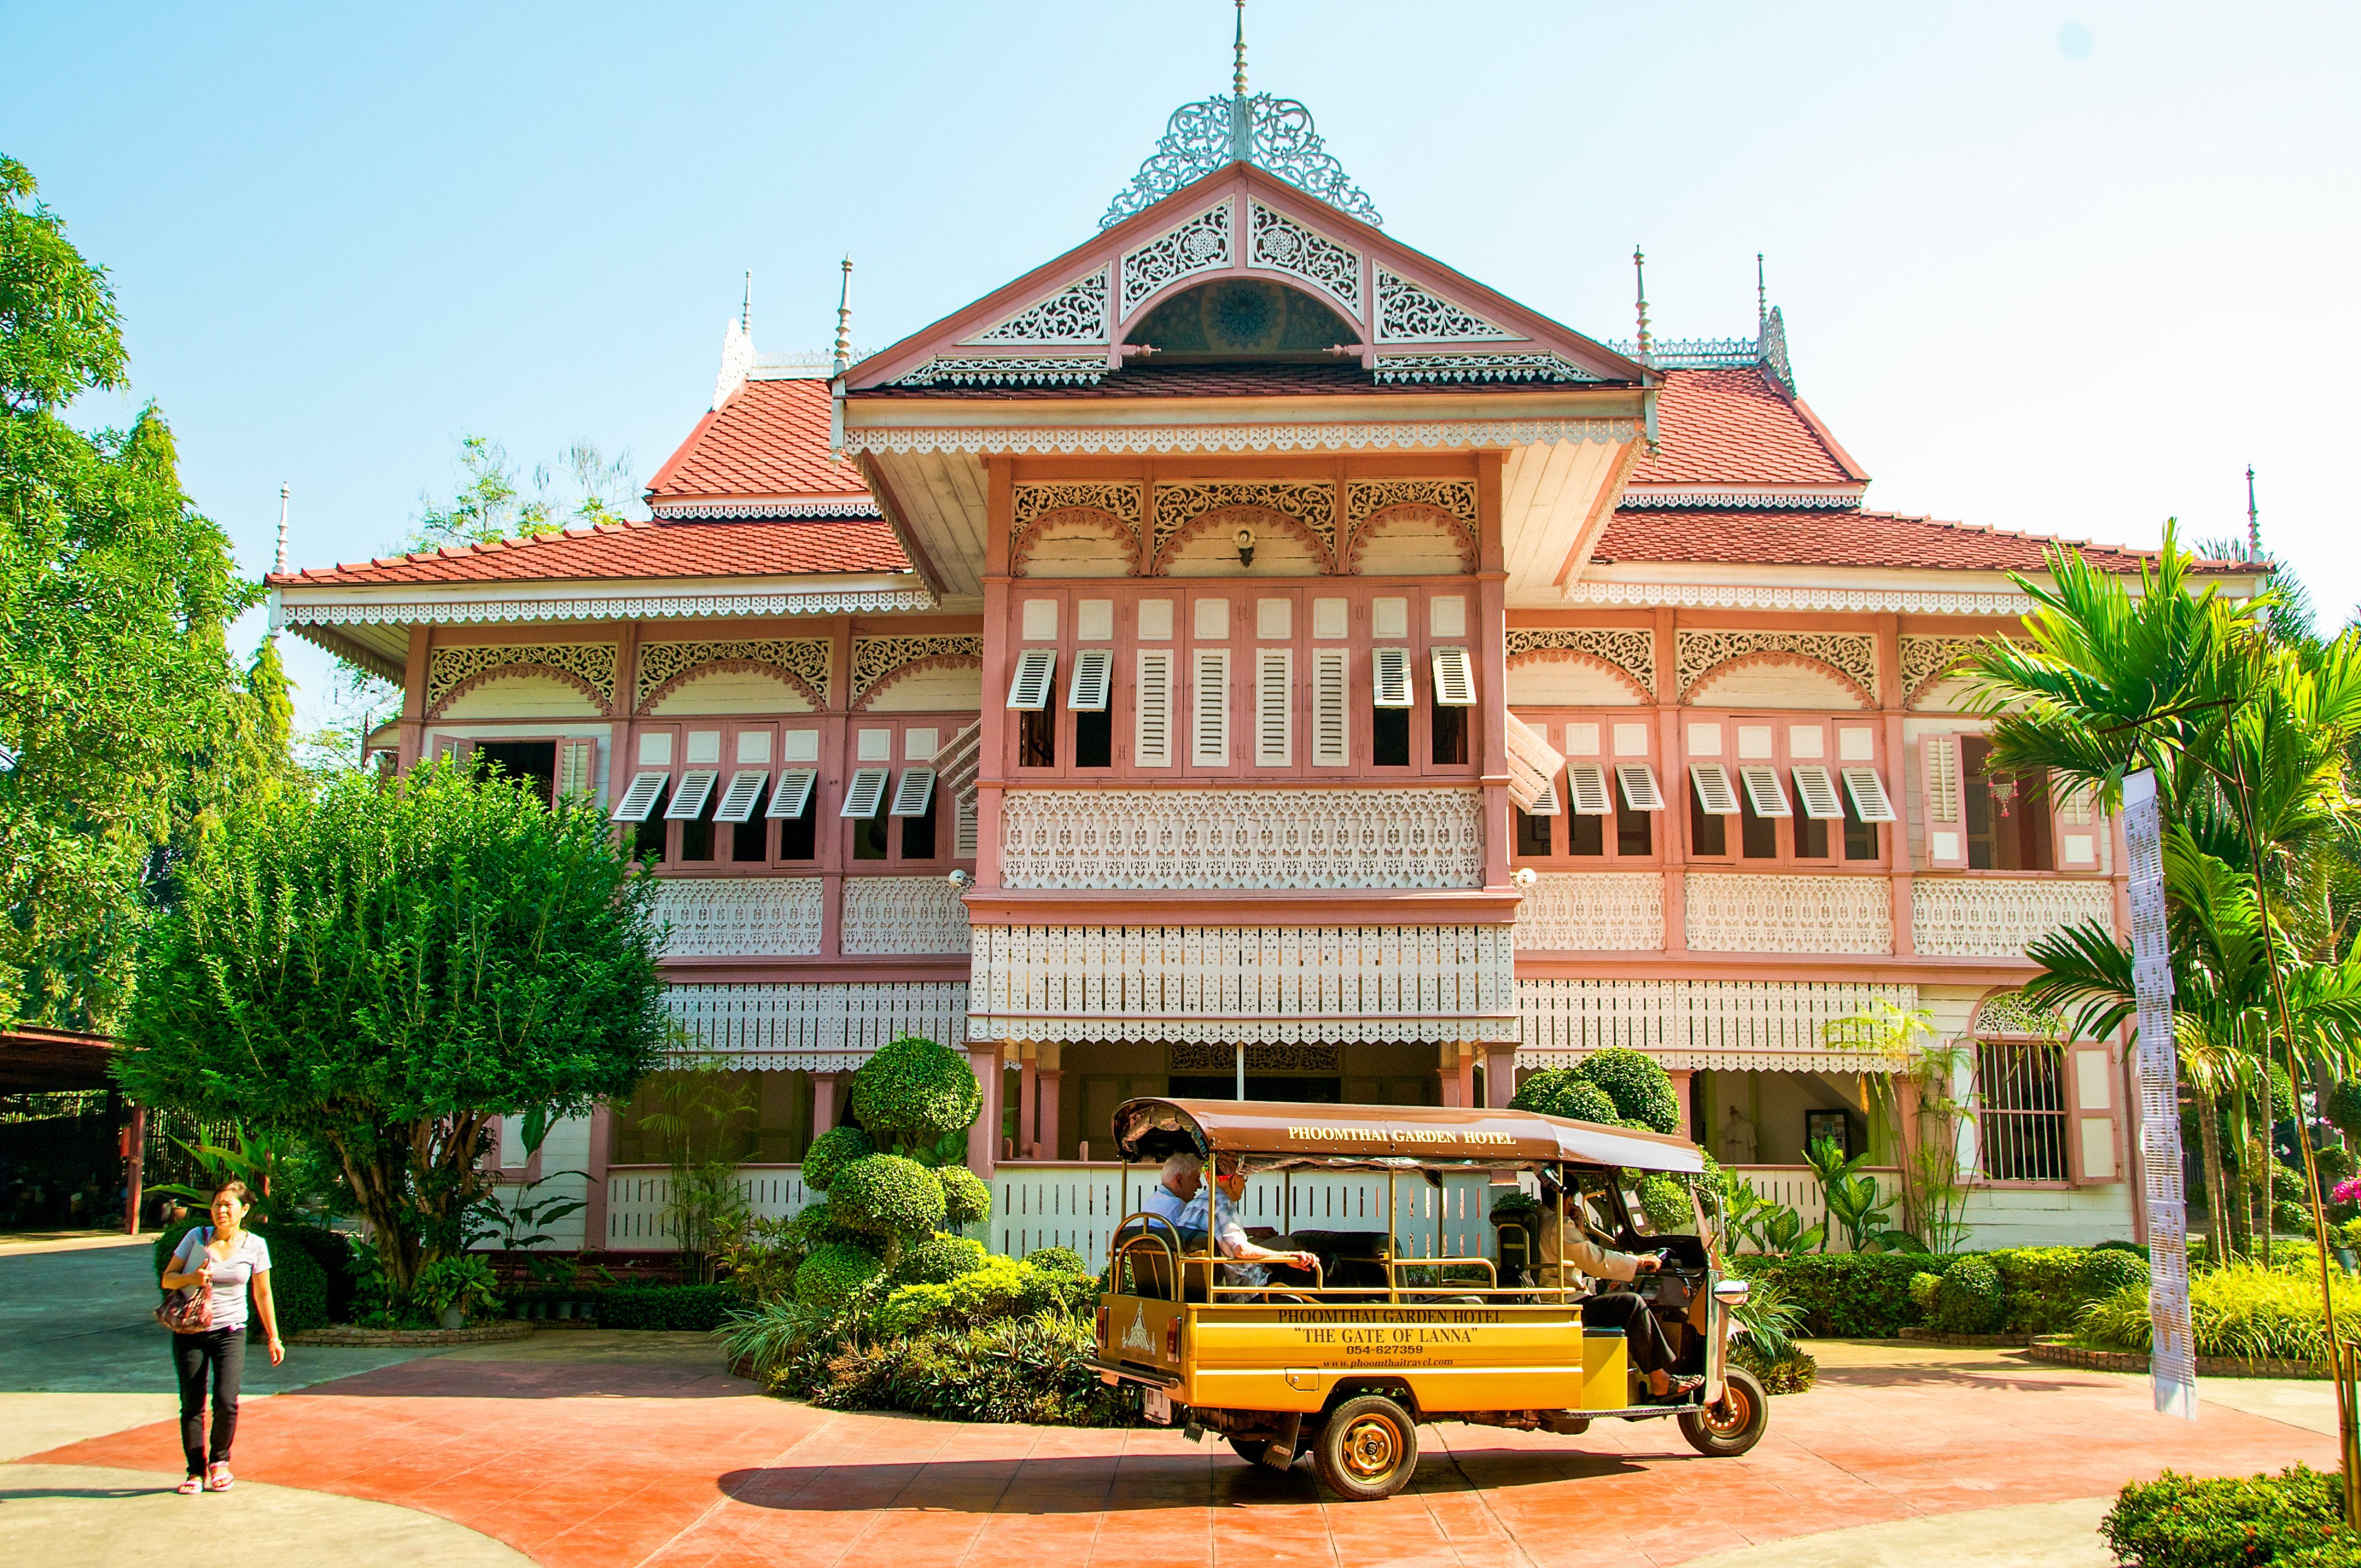 The Vongburi House in Phrae is decorated with gingerbread trim. The tourist-free town about 200km outside Chiang Mai used to be at the heart of Thailand’s teak trade, and the exotic wood can still be seen in its architecture. Photo: Ron Emmons